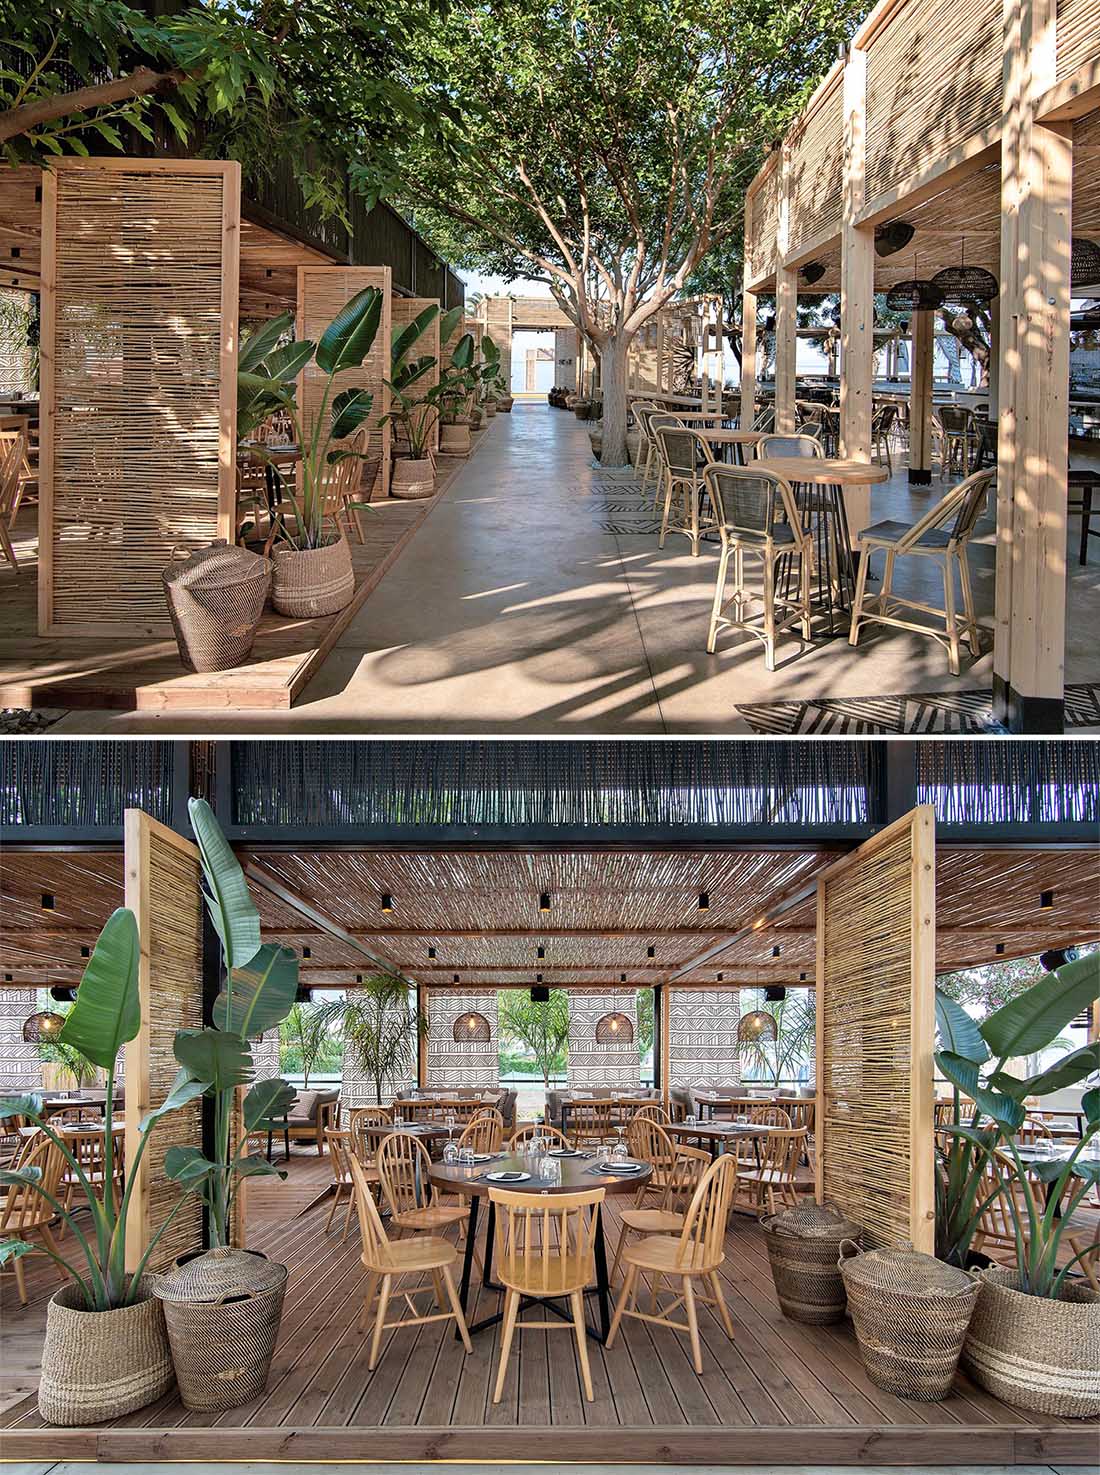 A modern outdoor restaurant with reed screens that provide shade and create a beach aesthetic.